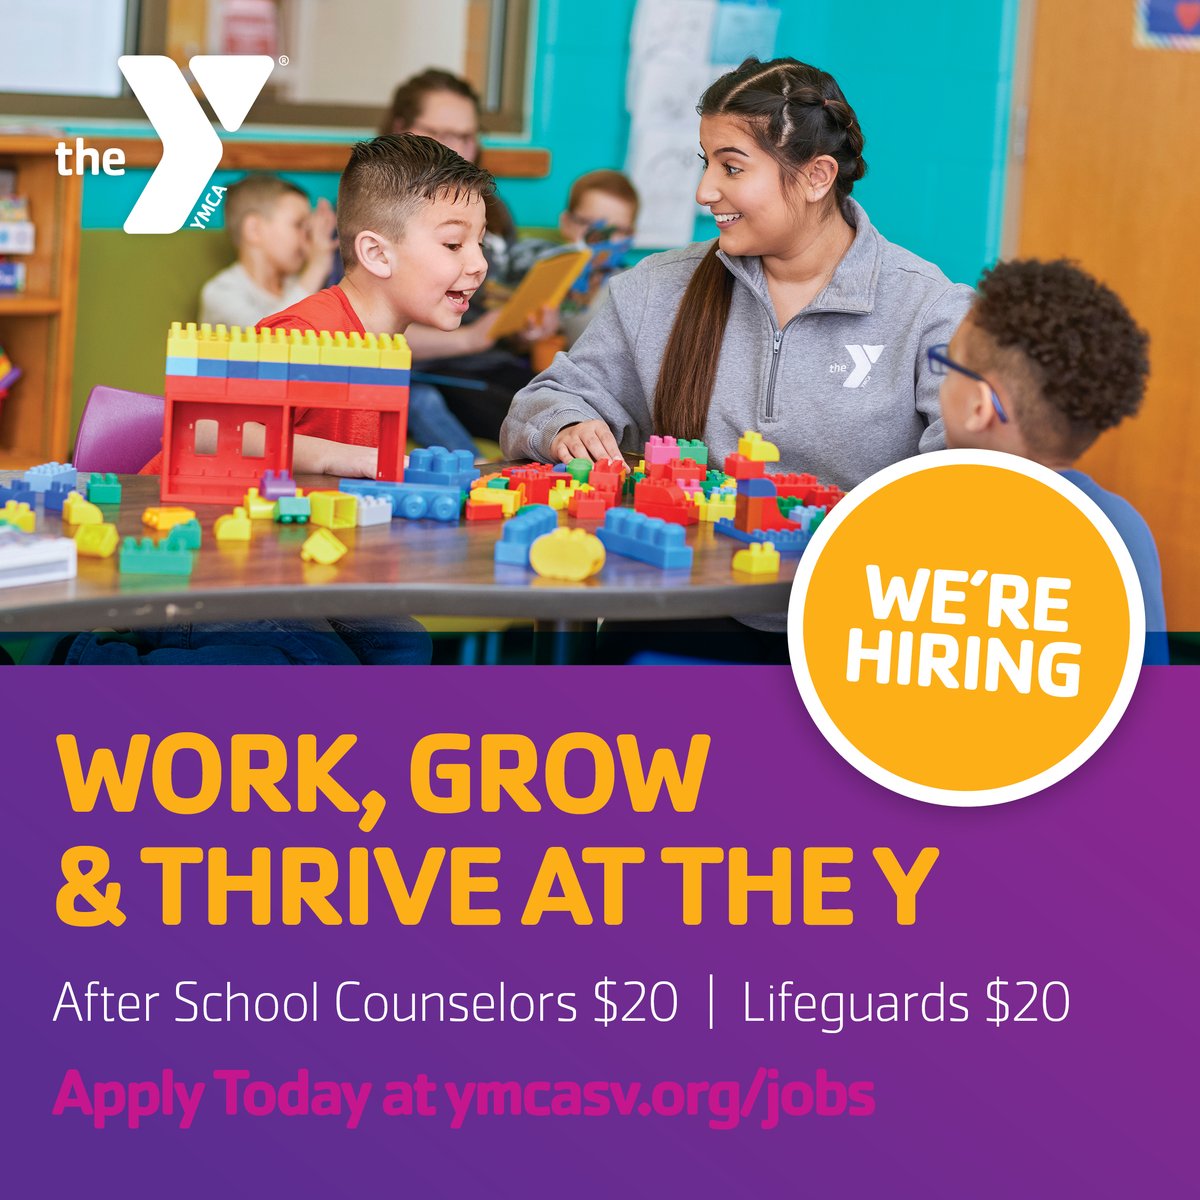 Discover a job that creates positive change in your community. 💗 Join the Y team! Learn more: ymcasv.org/jobs